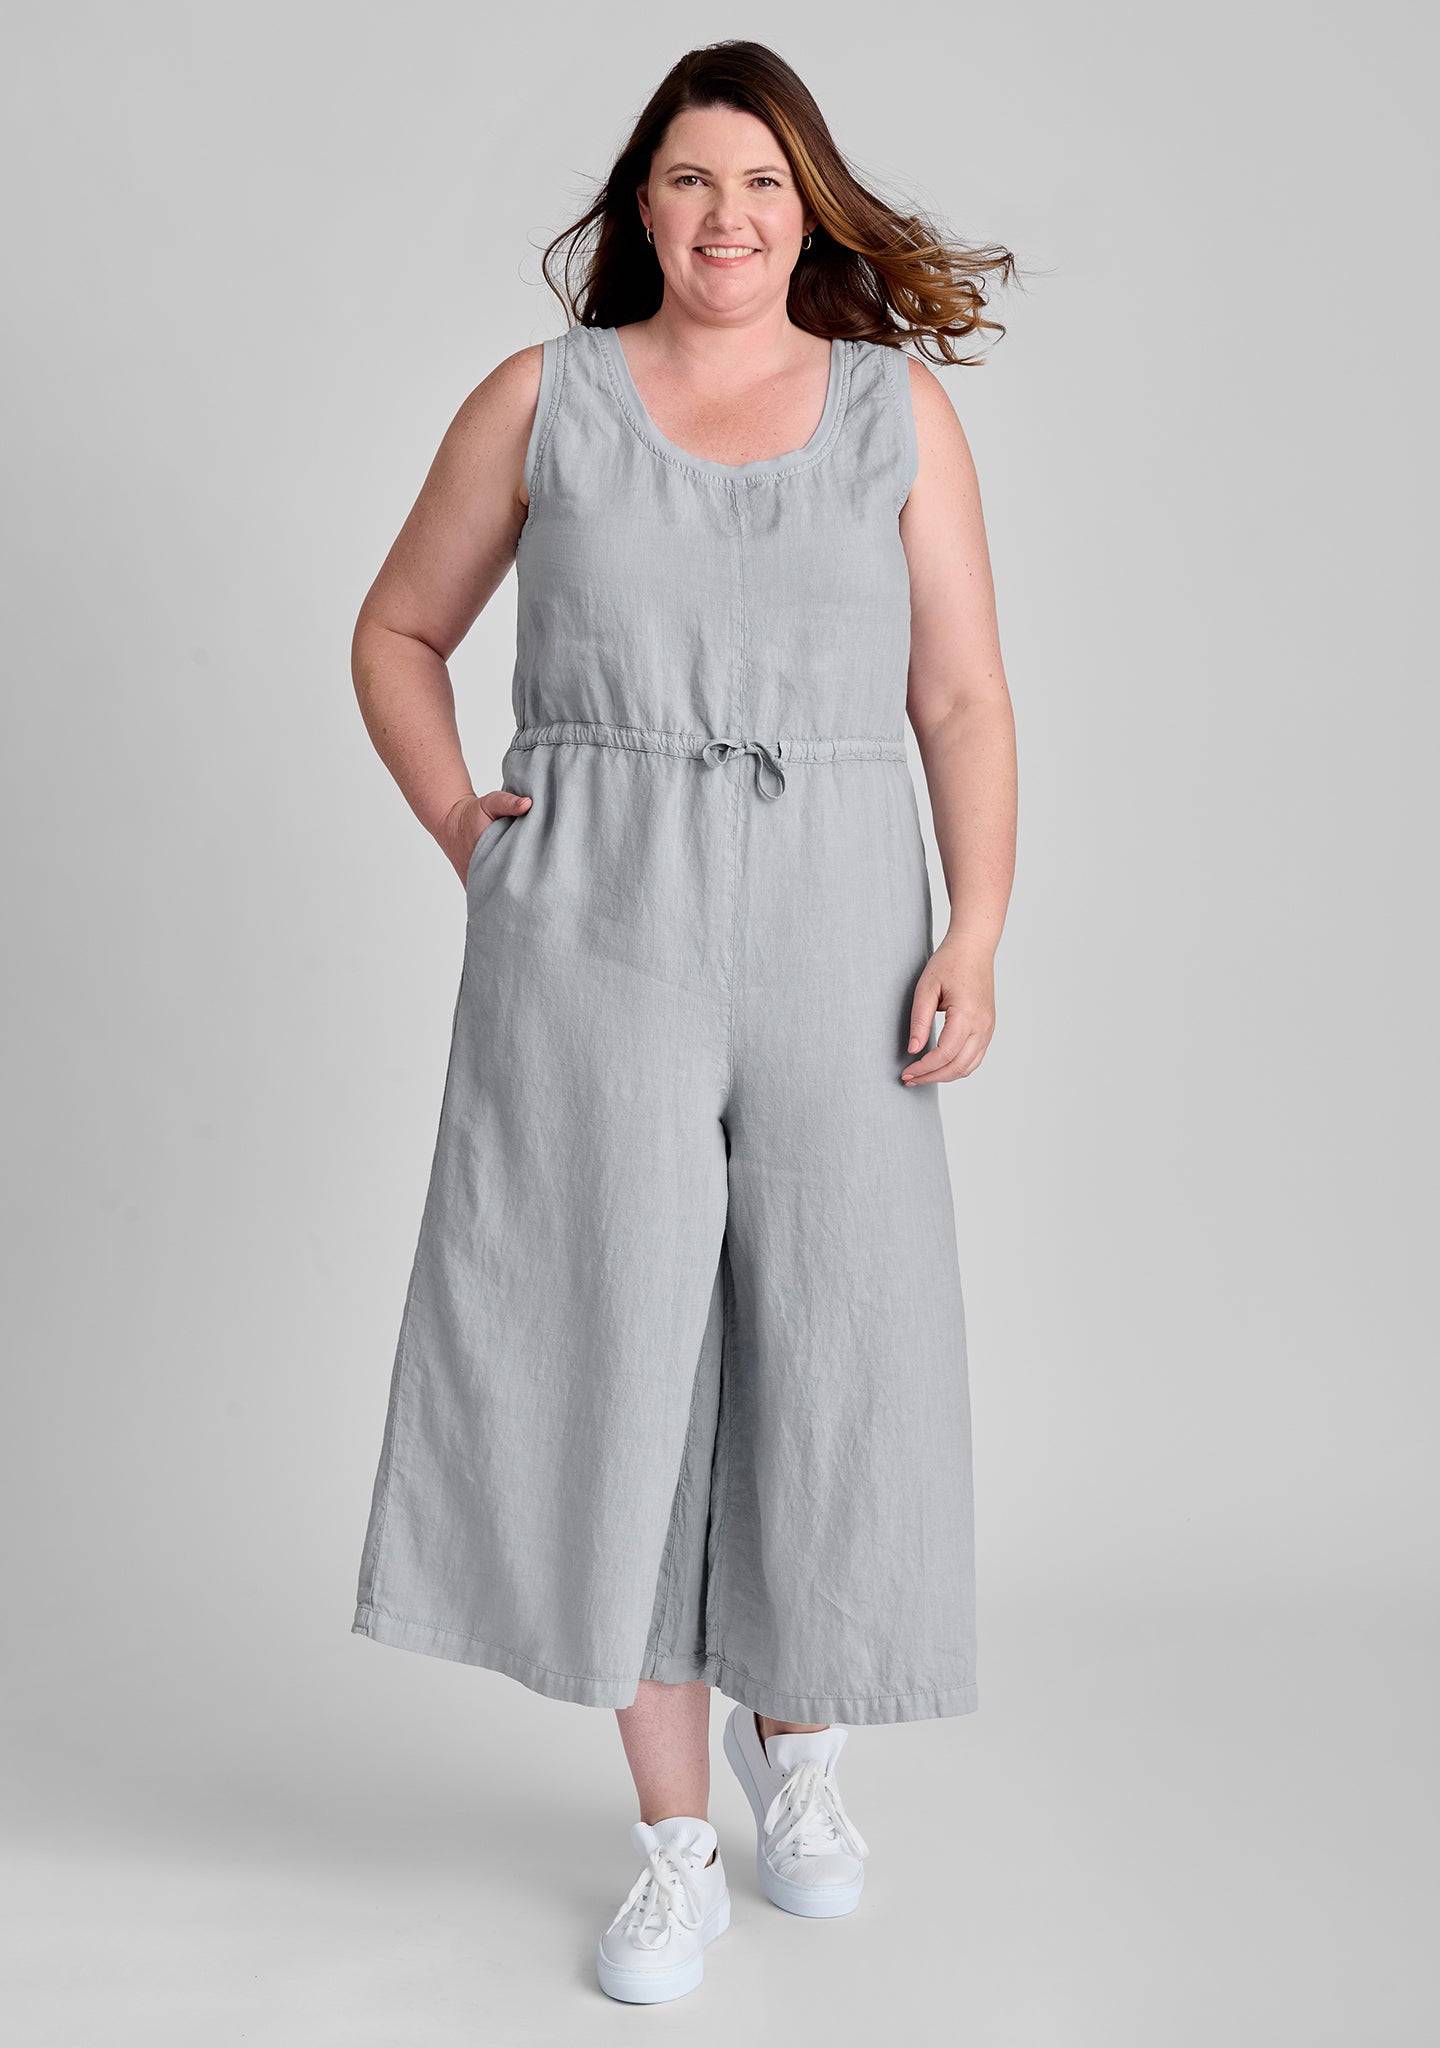 FLAX linen jumpsuit in grey